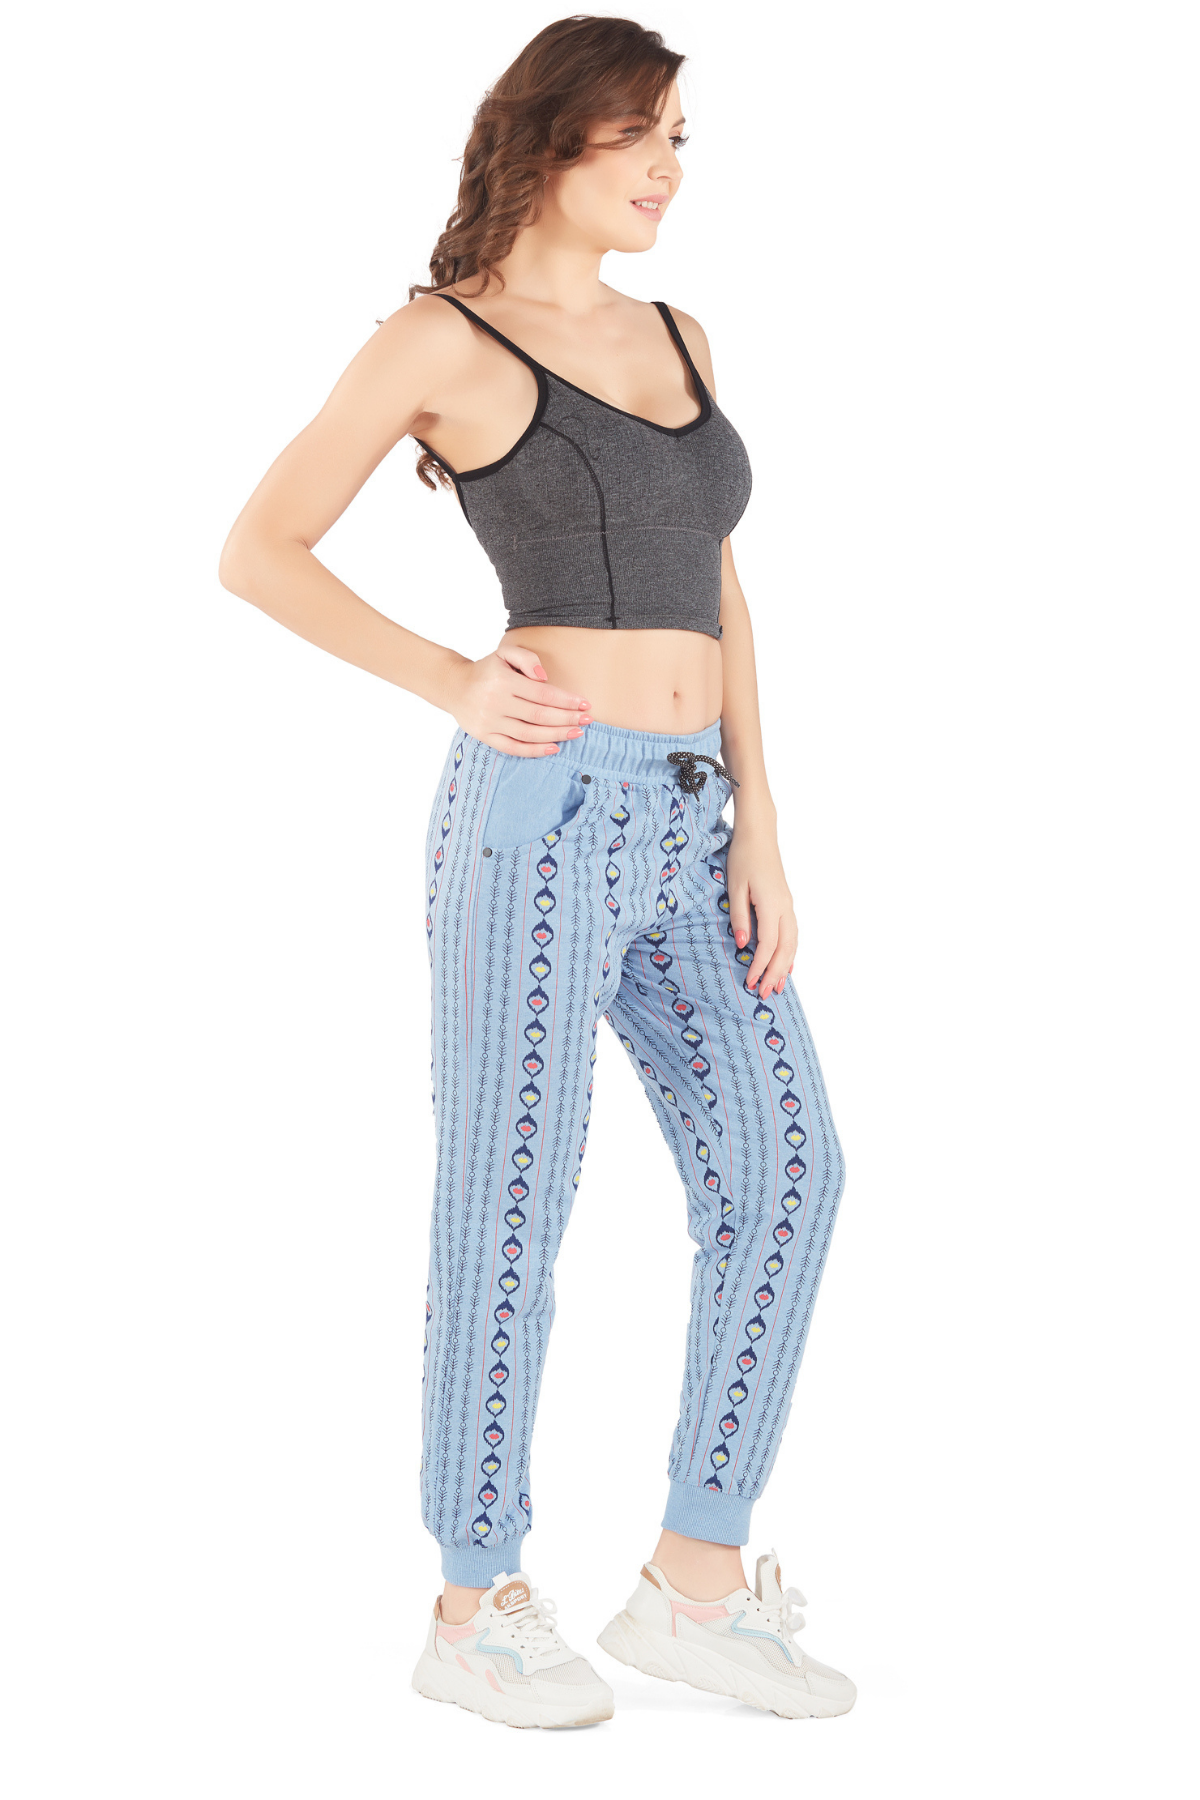 Comfortable Printed Joggers for Women in Sky Blue online at best prices